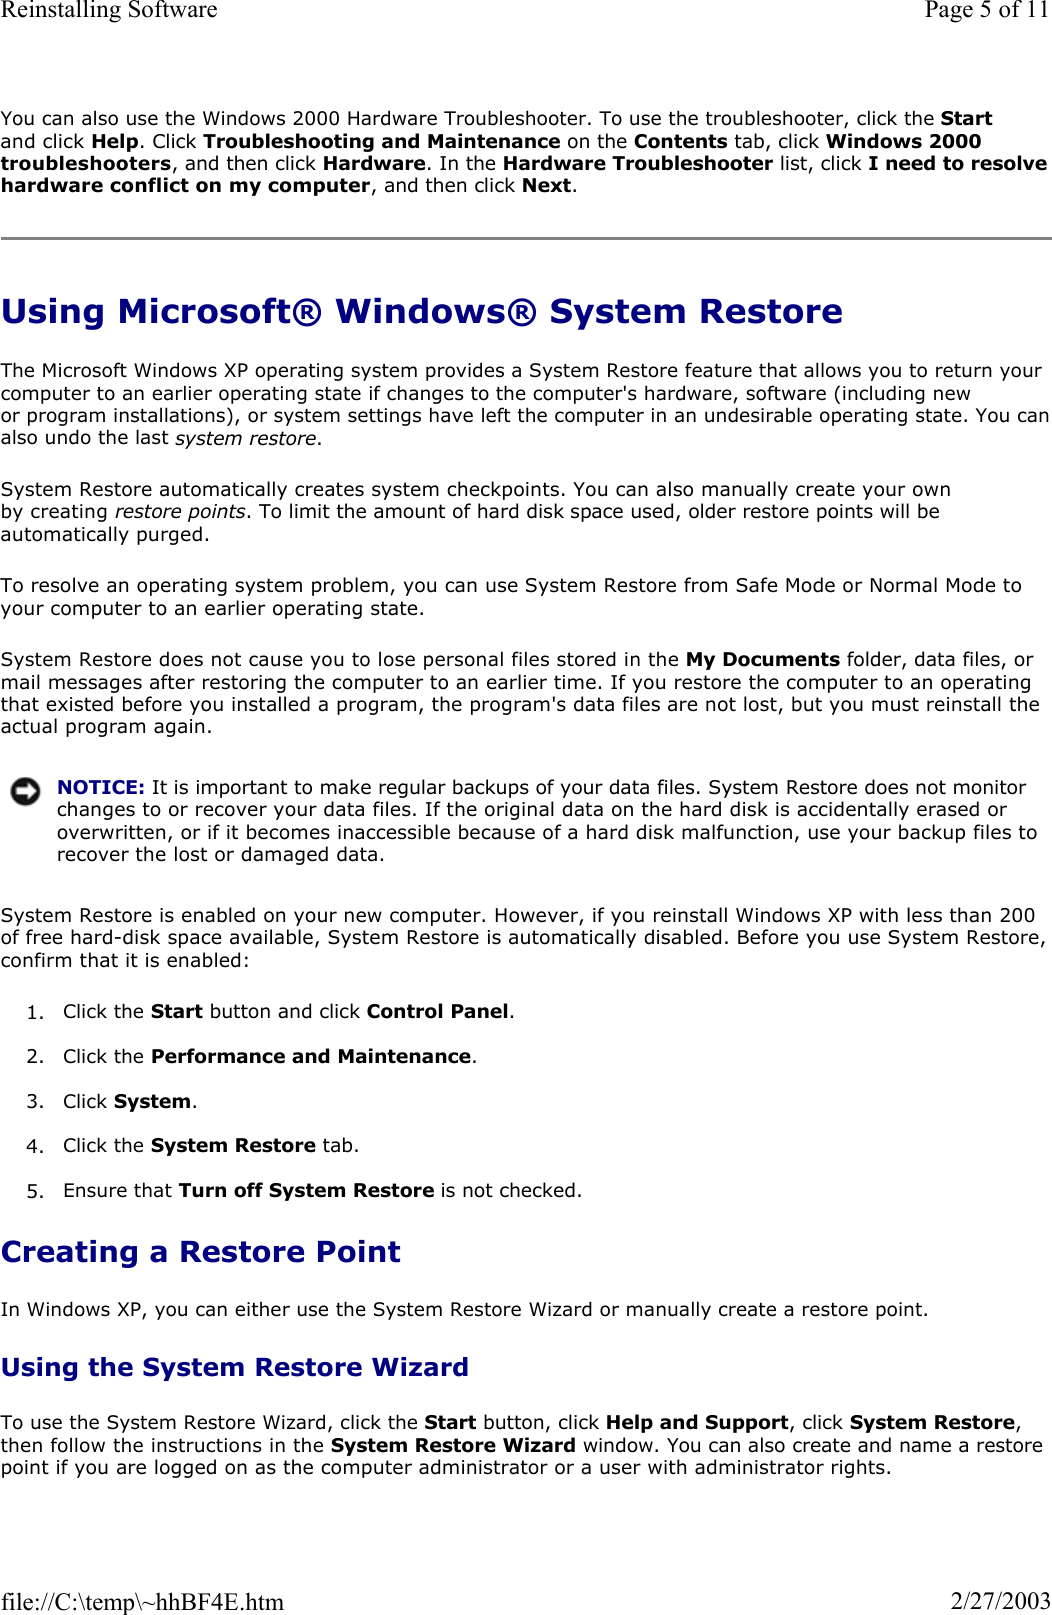 You can also use the Windows 2000 Hardware Troubleshooter. To use the troubleshooter, click the Startand click Help. Click Troubleshooting and Maintenance on the Contents tab, click Windows 2000 troubleshooters, and then click Hardware. In the Hardware Troubleshooter list, click I need to resolvehardware conflict on my computer, and then click Next.Using Microsoft® Windows® System Restore The Microsoft Windows XP operating system provides a System Restore feature that allows you to return your computer to an earlier operating state if changes to the computer&apos;s hardware, software (including new or program installations), or system settings have left the computer in an undesirable operating state. You canalso undo the last system restore.System Restore automatically creates system checkpoints. You can also manually create your own by creating restore points. To limit the amount of hard disk space used, older restore points will be automatically purged. To resolve an operating system problem, you can use System Restore from Safe Mode or Normal Mode to your computer to an earlier operating state. System Restore does not cause you to lose personal files stored in the My Documents folder, data files, or mail messages after restoring the computer to an earlier time. If you restore the computer to an operating that existed before you installed a program, the program&apos;s data files are not lost, but you must reinstall the actual program again.  System Restore is enabled on your new computer. However, if you reinstall Windows XP with less than 200 of free hard-disk space available, System Restore is automatically disabled. Before you use System Restore,confirm that it is enabled: 1. Click the Start button and click Control Panel.2. Click the Performance and Maintenance.3. Click System.4. Click the System Restore tab. 5. Ensure that Turn off System Restore is not checked.  Creating a Restore Point In Windows XP, you can either use the System Restore Wizard or manually create a restore point. Using the System Restore Wizard To use the System Restore Wizard, click the Start button, click Help and Support, click System Restore,then follow the instructions in the System Restore Wizard window. You can also create and name a restore point if you are logged on as the computer administrator or a user with administrator rights. NOTICE: It is important to make regular backups of your data files. System Restore does not monitor changes to or recover your data files. If the original data on the hard disk is accidentally erased or overwritten, or if it becomes inaccessible because of a hard disk malfunction, use your backup files to recover the lost or damaged data.Page 5 of 11Reinstalling Software2/27/2003file://C:\temp\~hhBF4E.htm